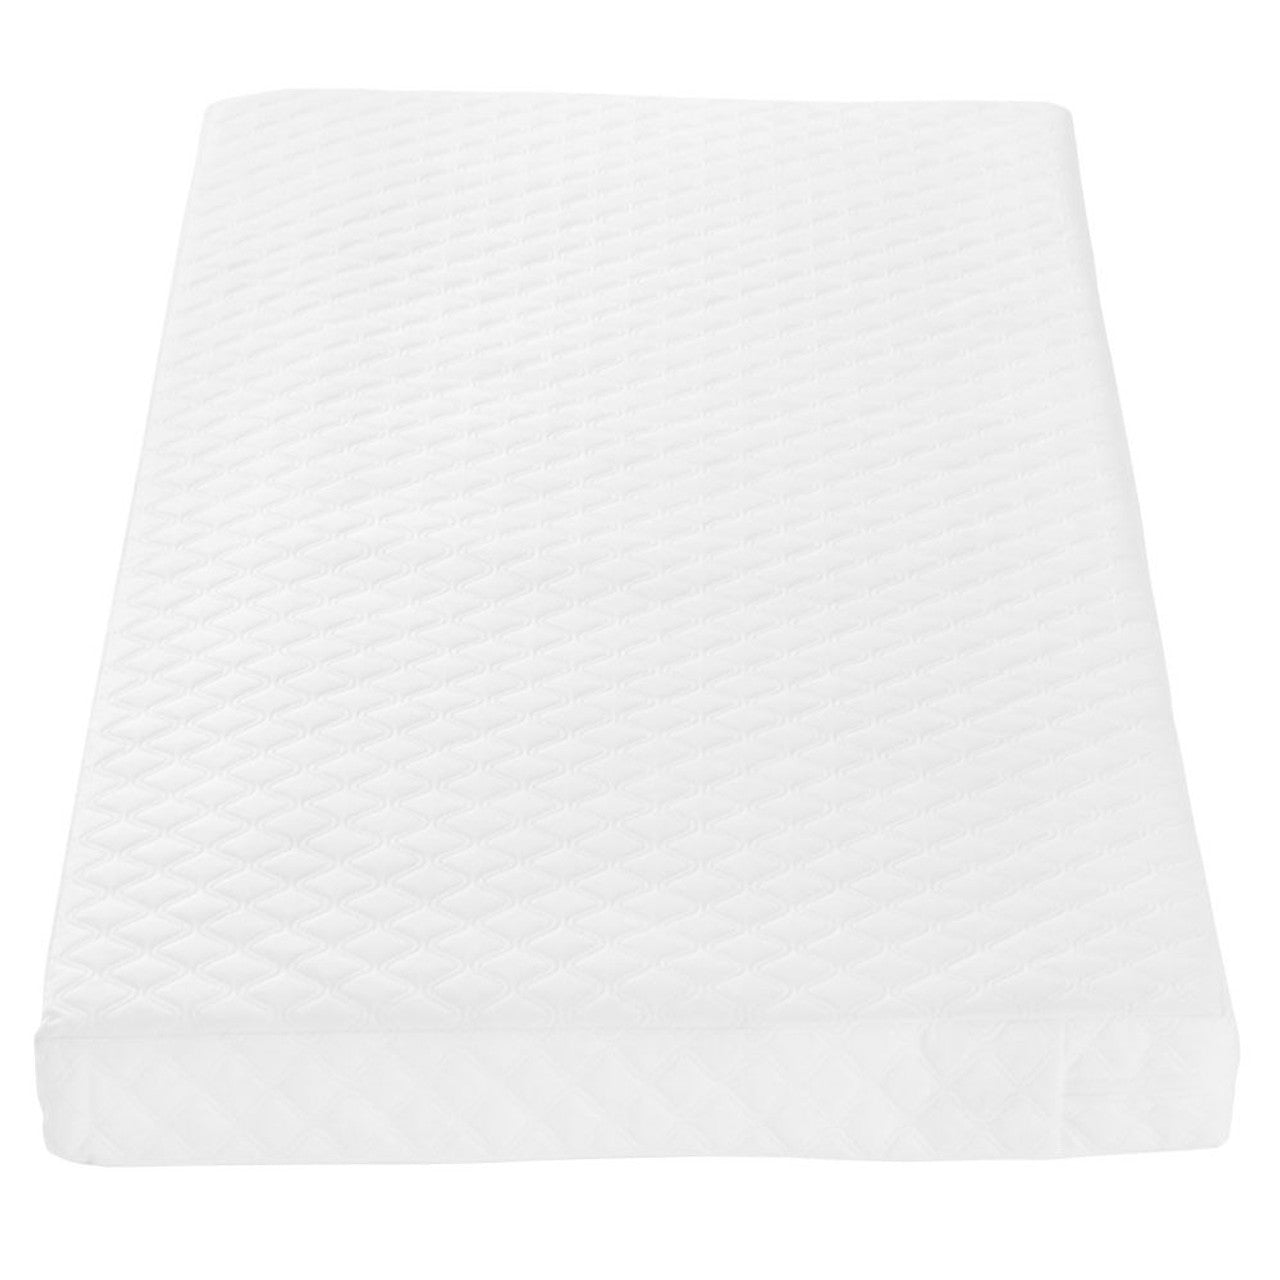 Tutti Bambini Sprung Cot Mattress (60 x 120 cm) - For Your Little One